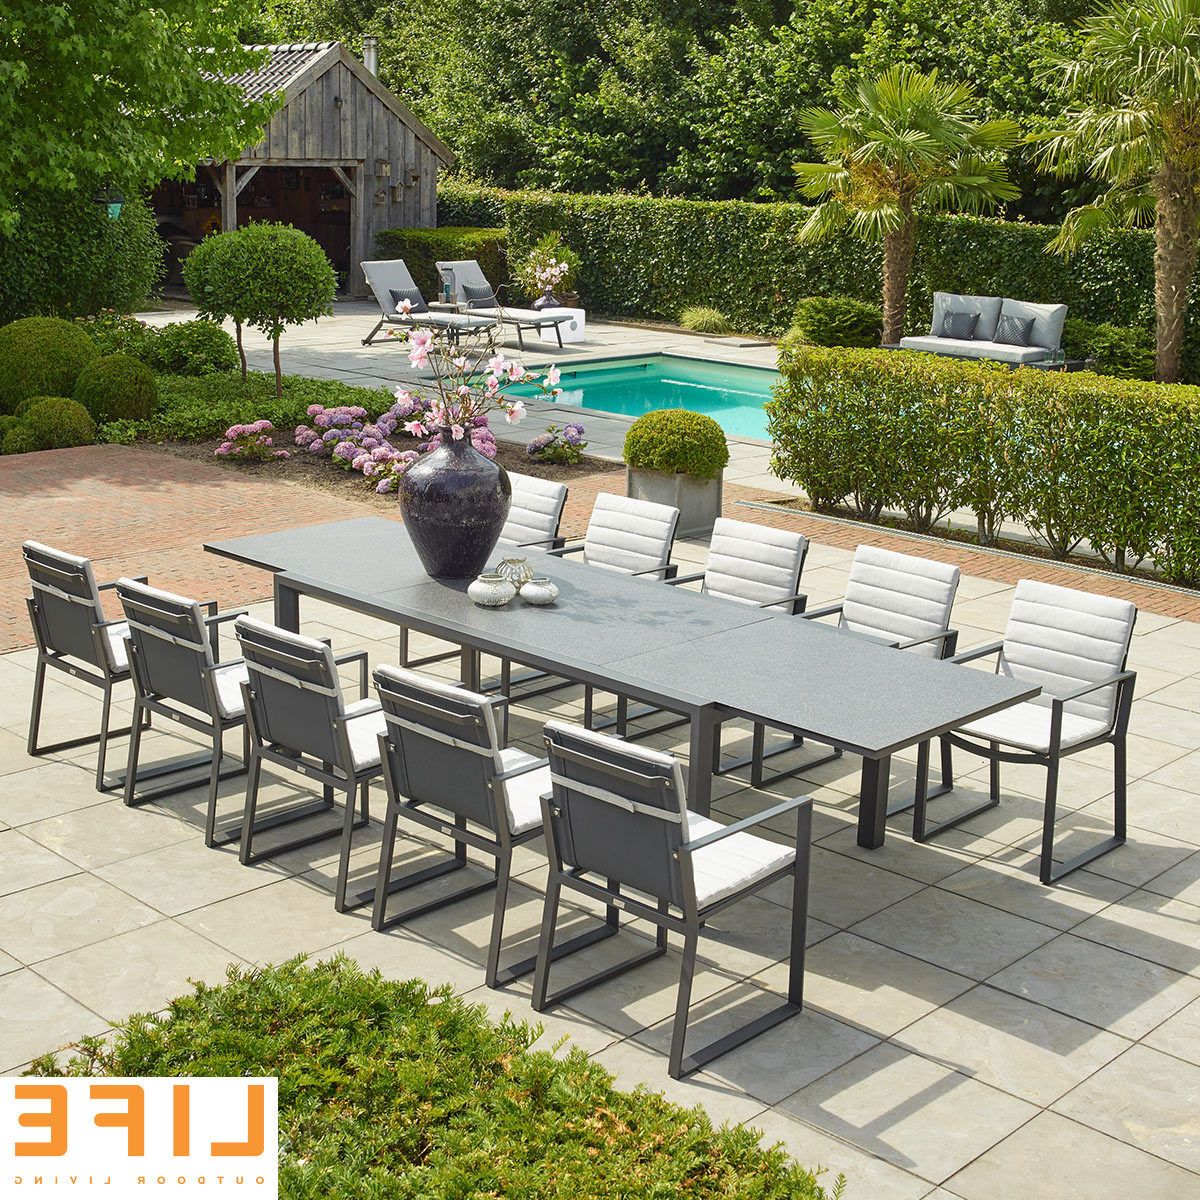 Life Outdoor Living Barossa 11 Piece Extendable Dining Table Set Pertaining To Most Current 11 Piece Extendable Patio Dining Sets (View 11 of 15)